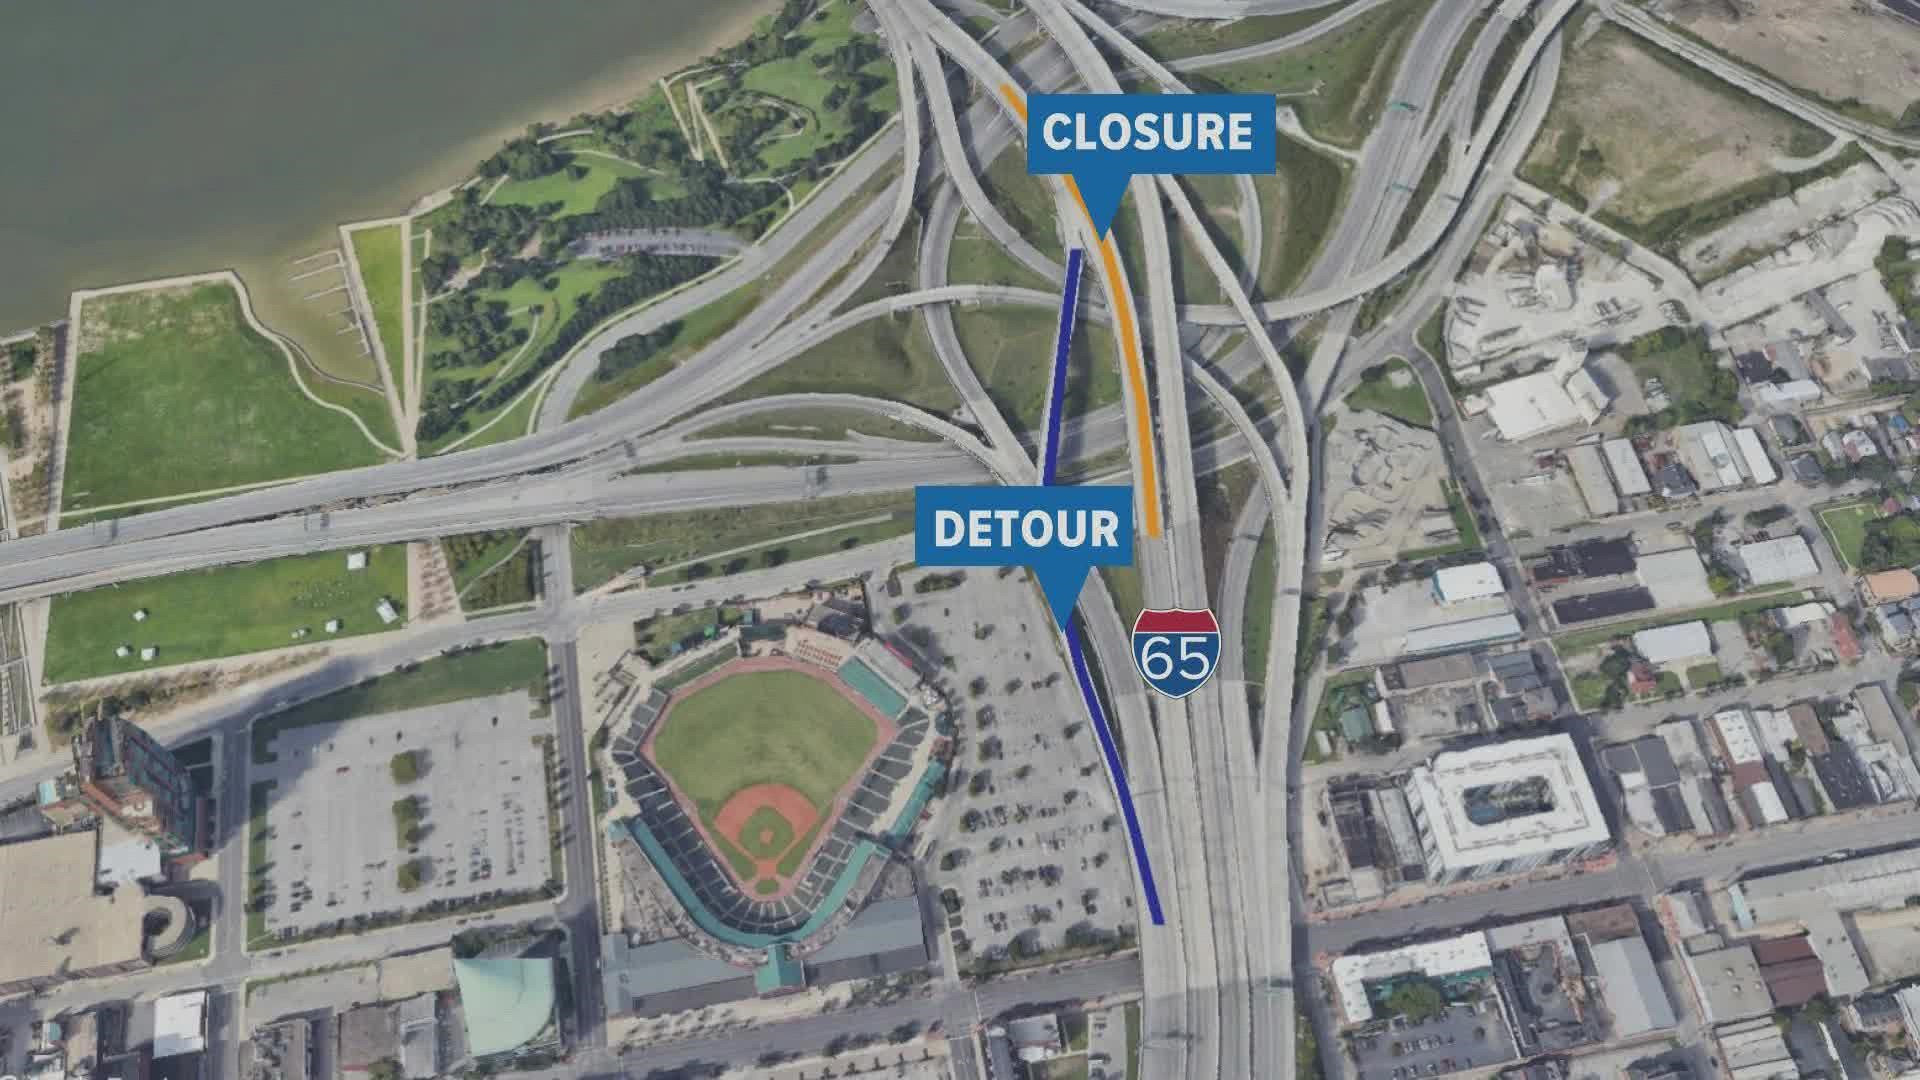 Once you cross the Kennedy bridge, you'll be diverted onto the Jefferson Street ramp where you can then merge back onto the interstate north of "Hospital Curve."